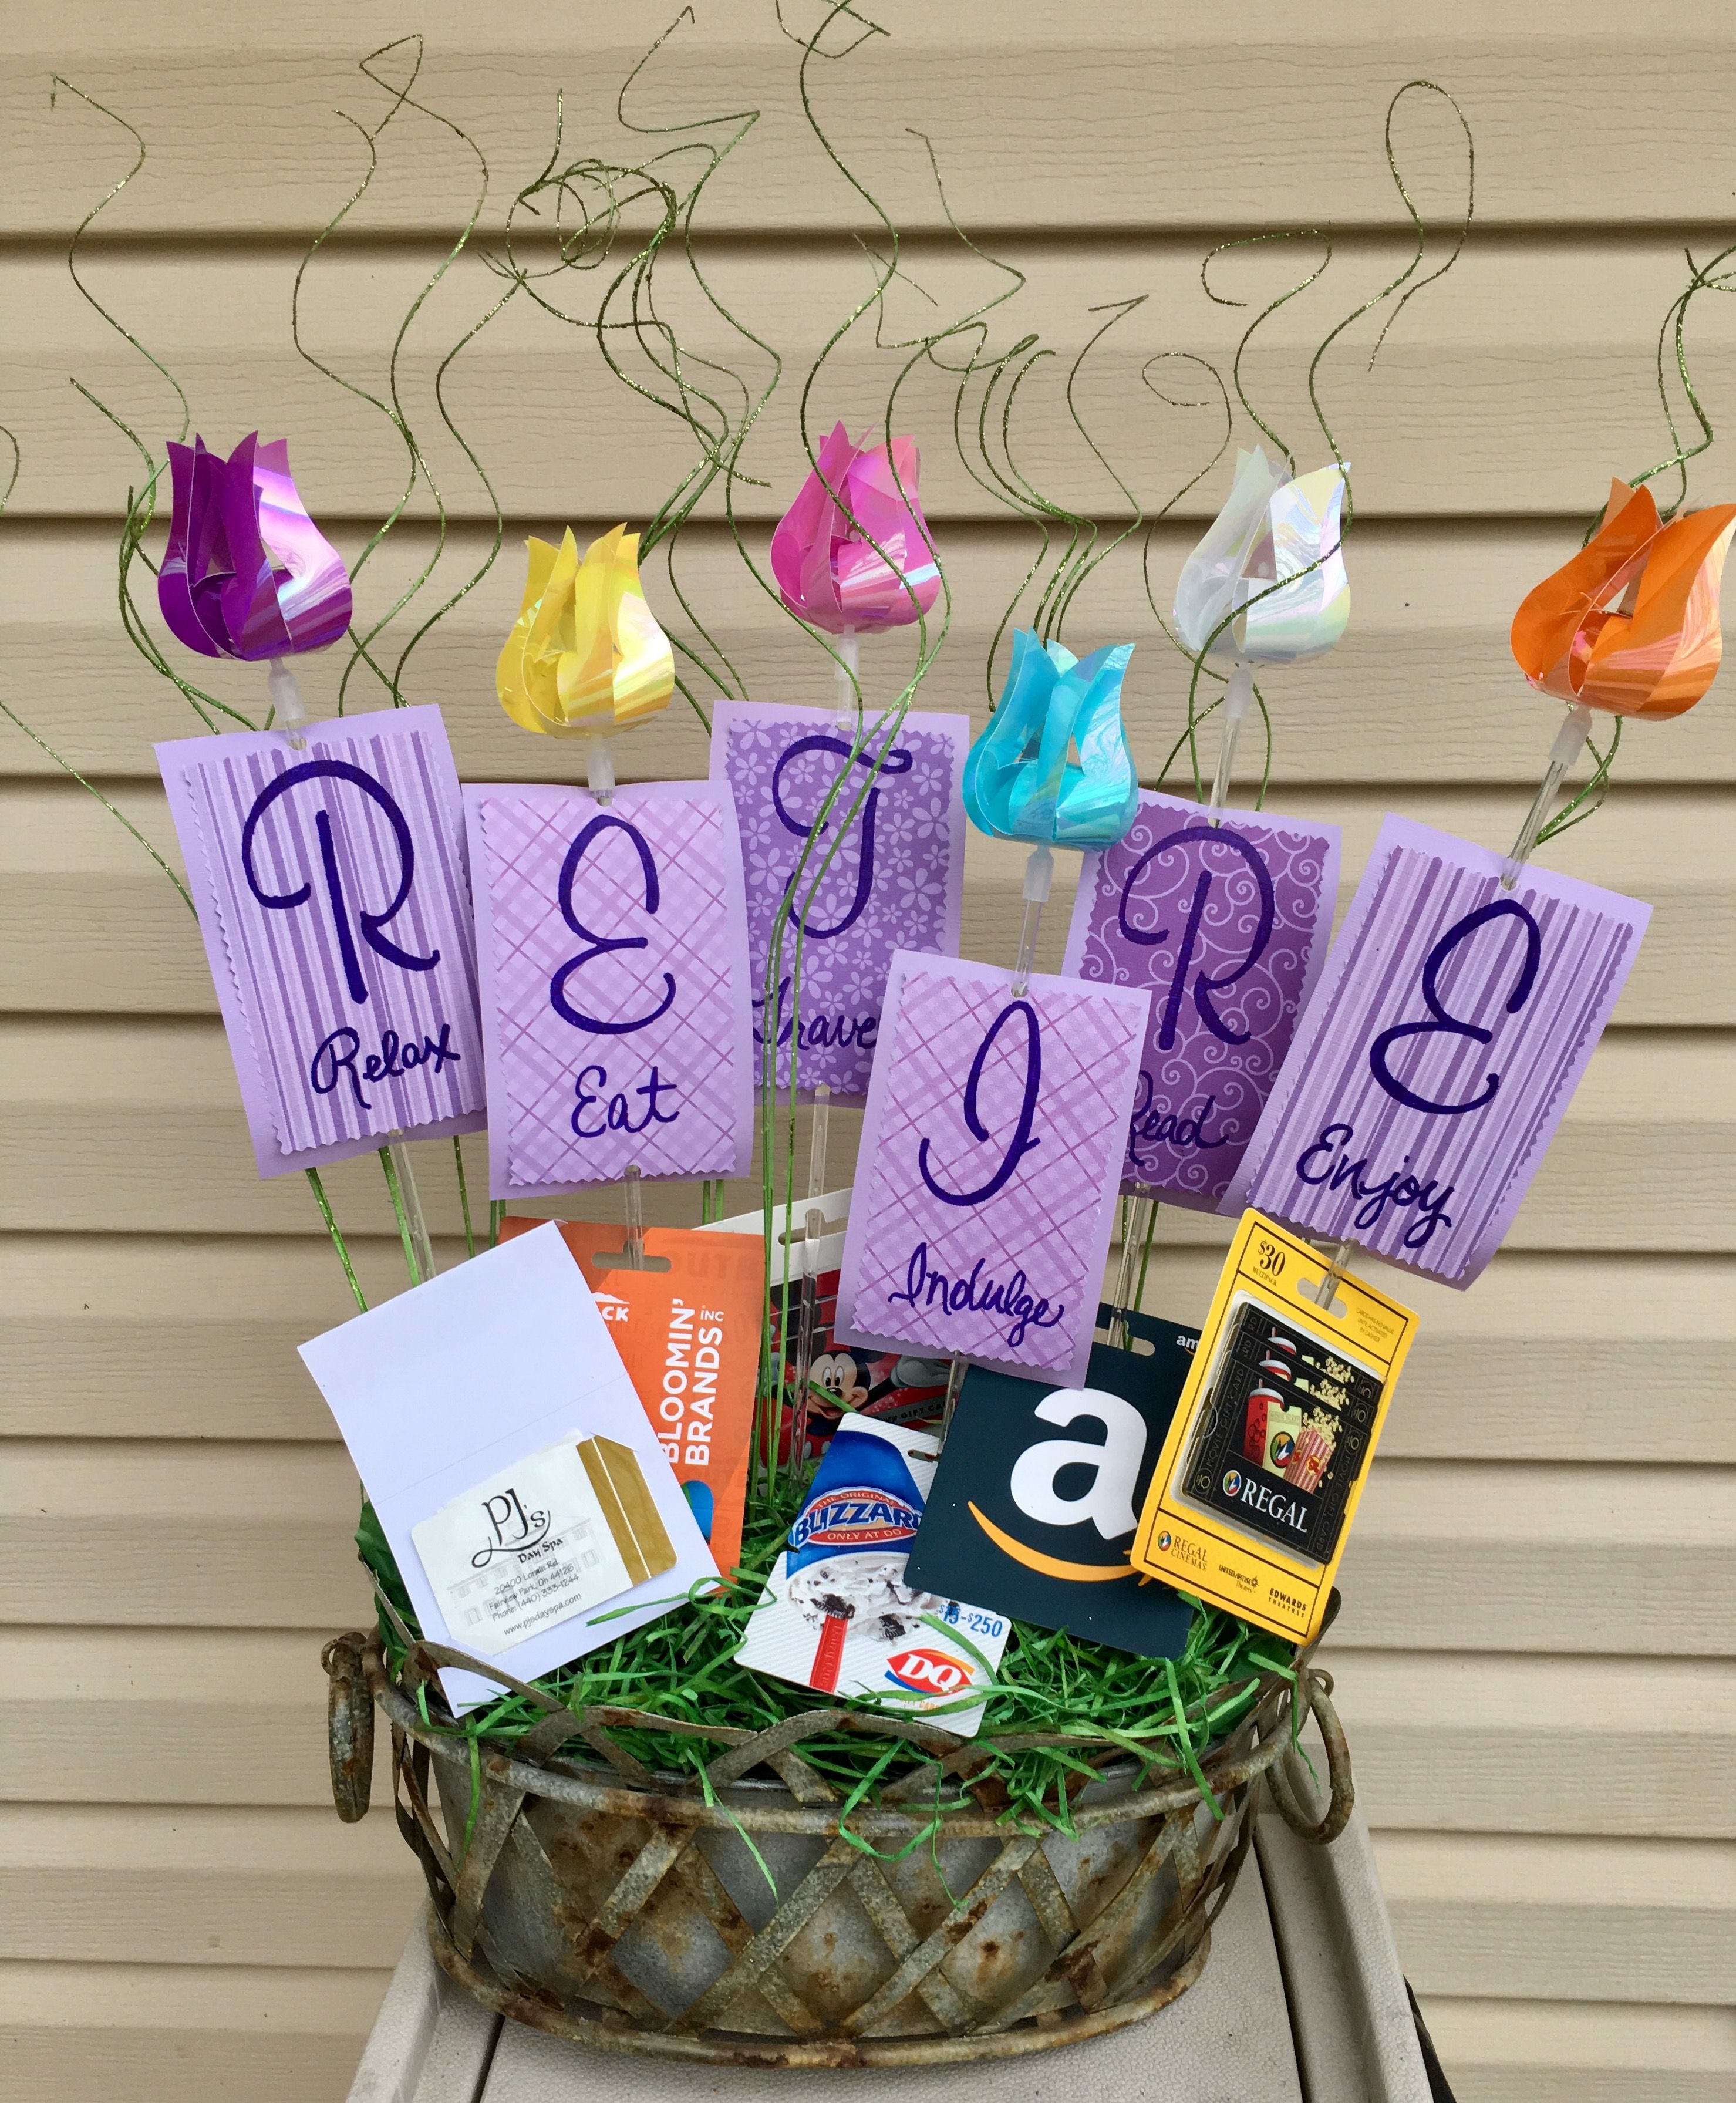 Retirement gift basket with gift cards: Relax, Eat, Travel, Indulge ...